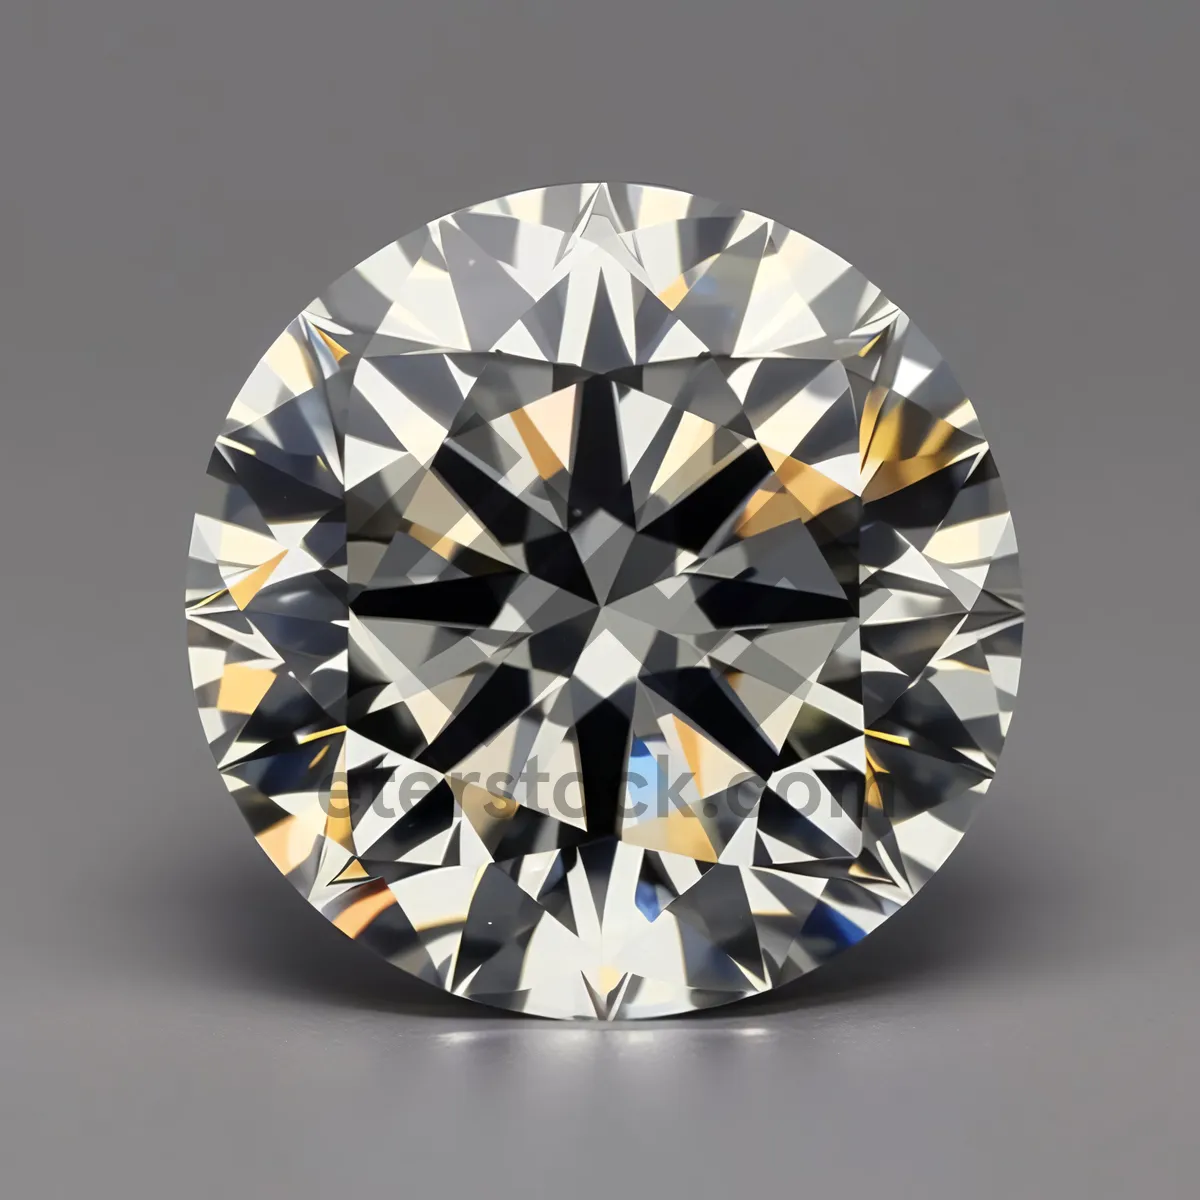 Picture of Shimmering Jewel: Brilliant Diamond in Transparent Glass